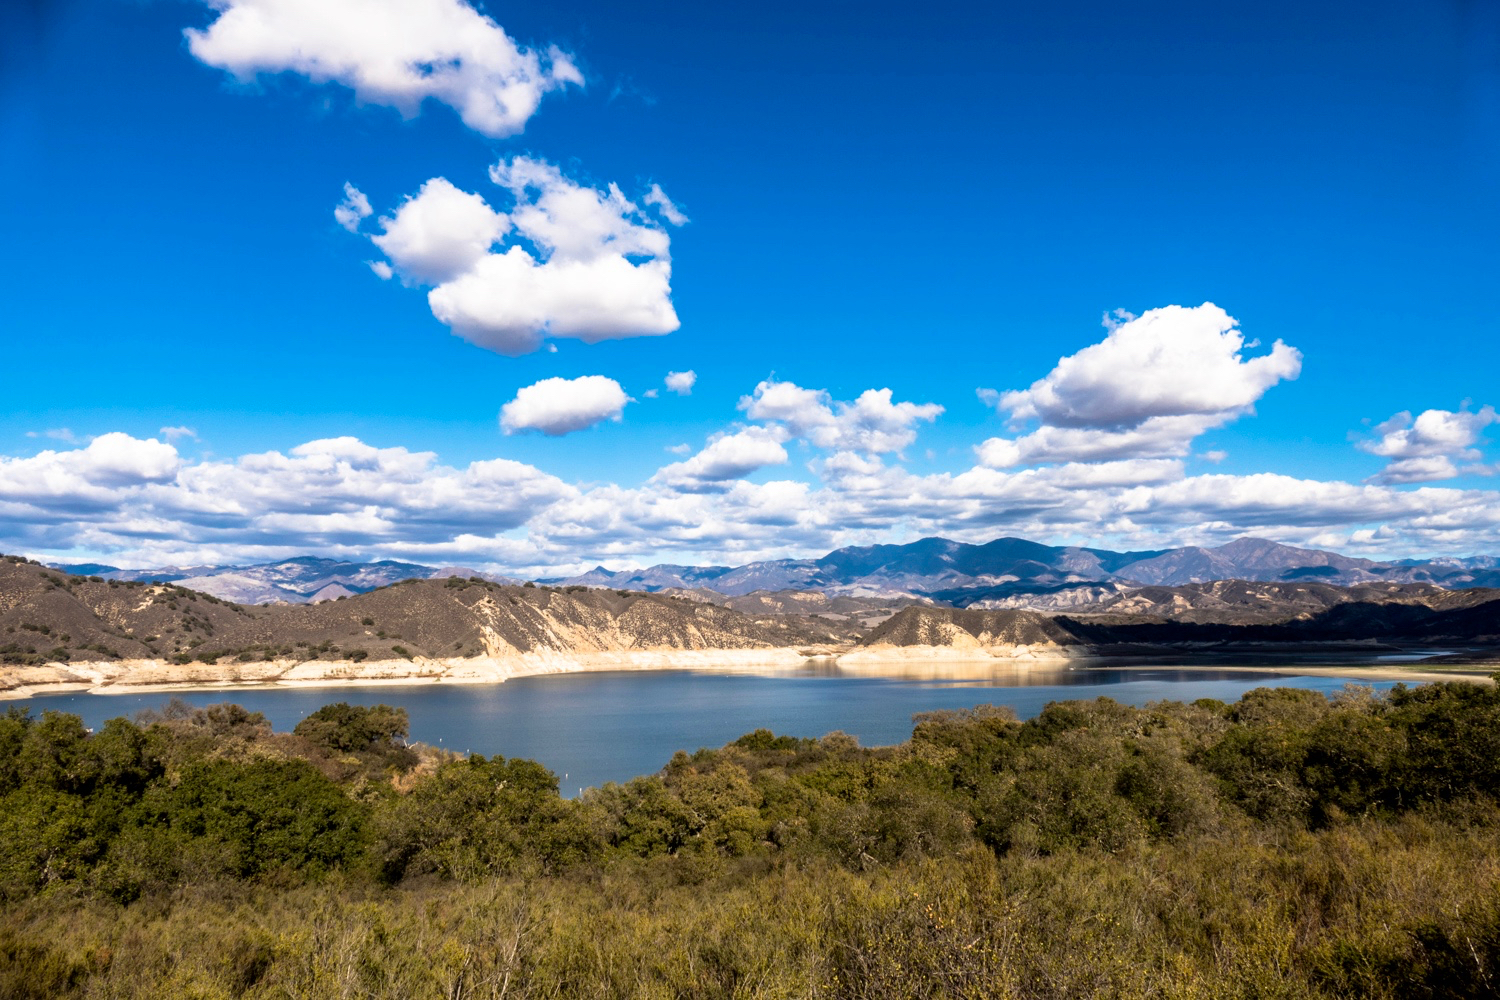 Overlooking the water with mountains in the background and fluffy white clouds against a blue sky in Santa Barbara County. 